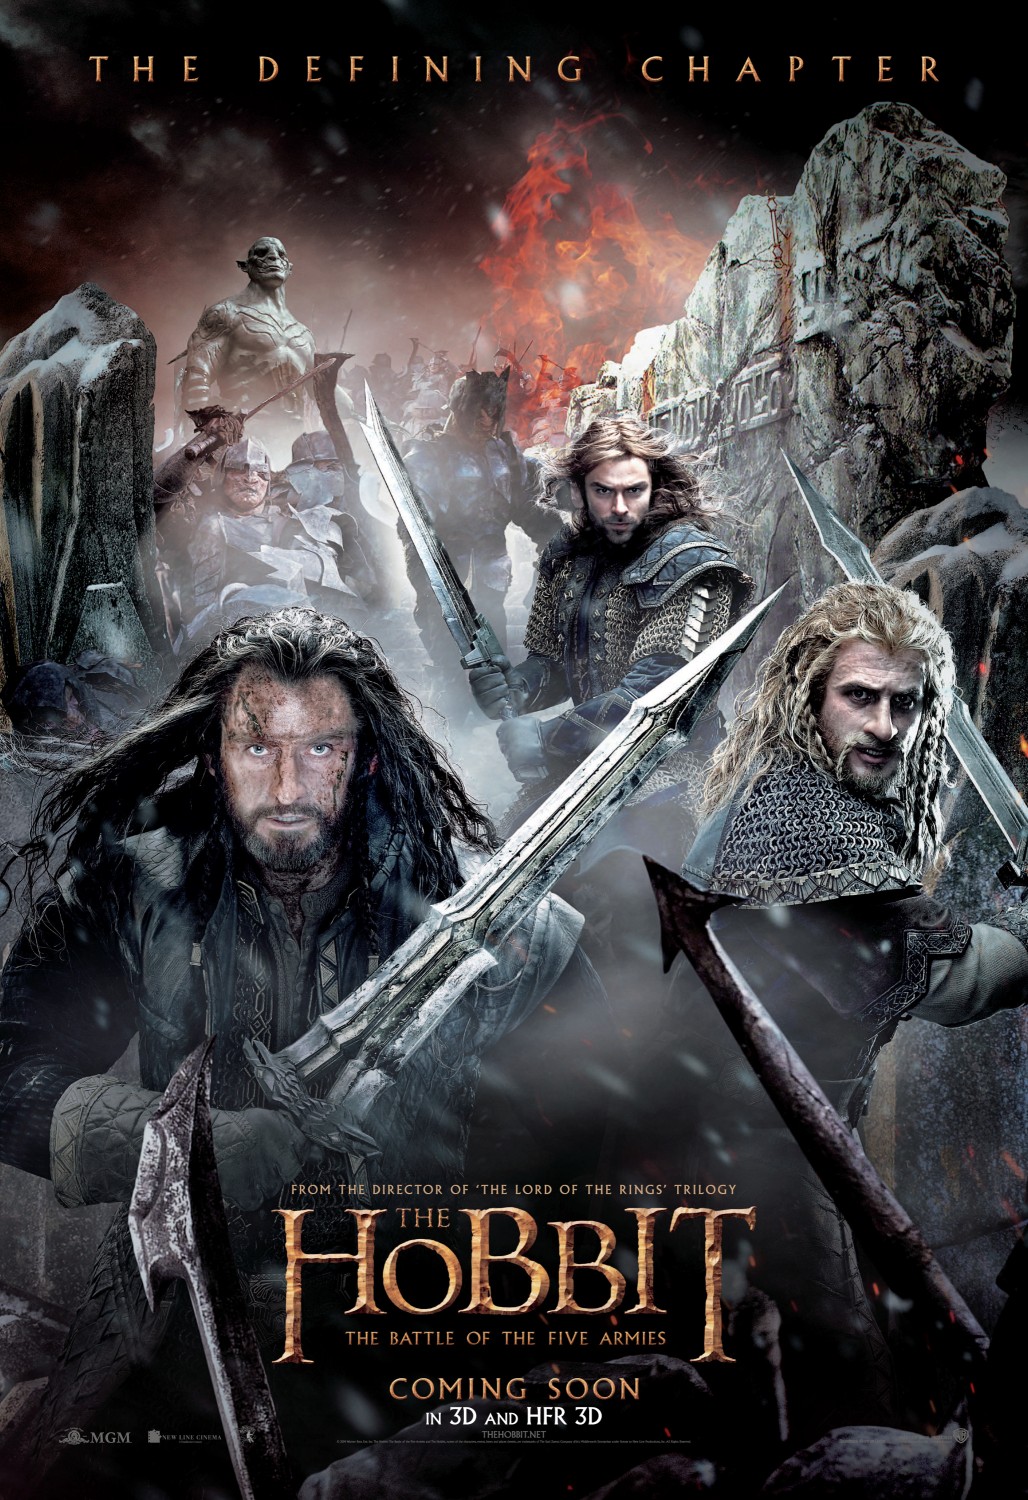 Extra Large Movie Poster Image for The Hobbit: The Battle of the Five Armies (#27 of 28)